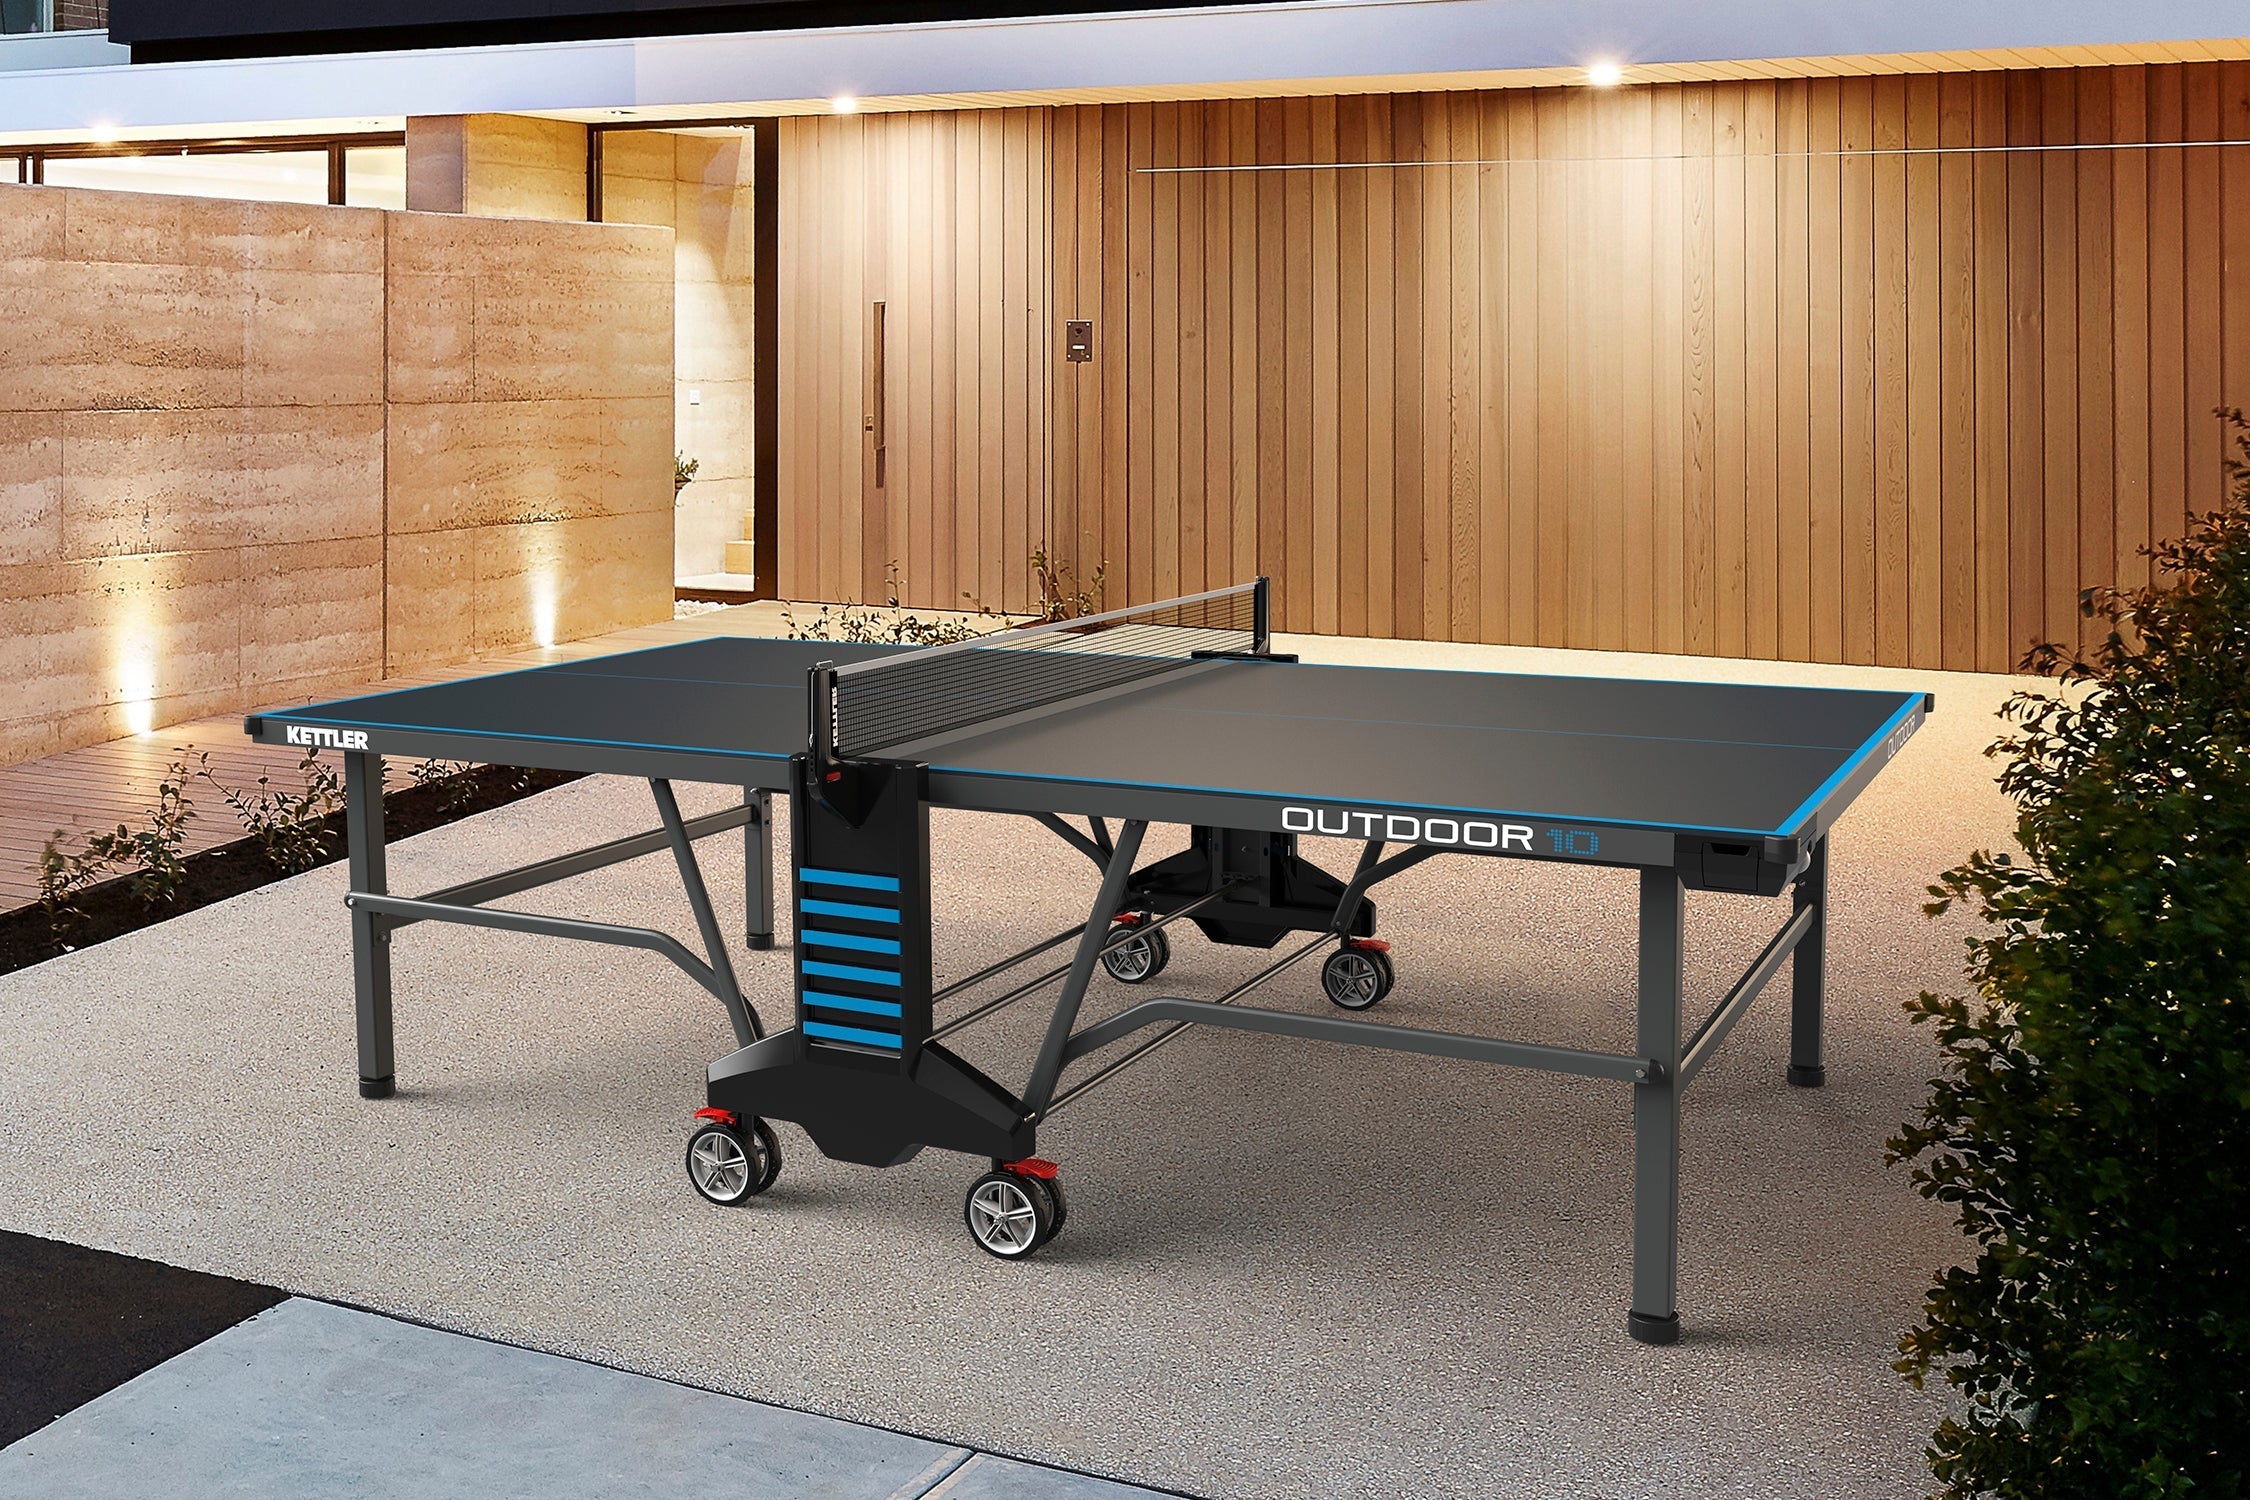 Lifestyle shot of outdoor tournament size table tennis table